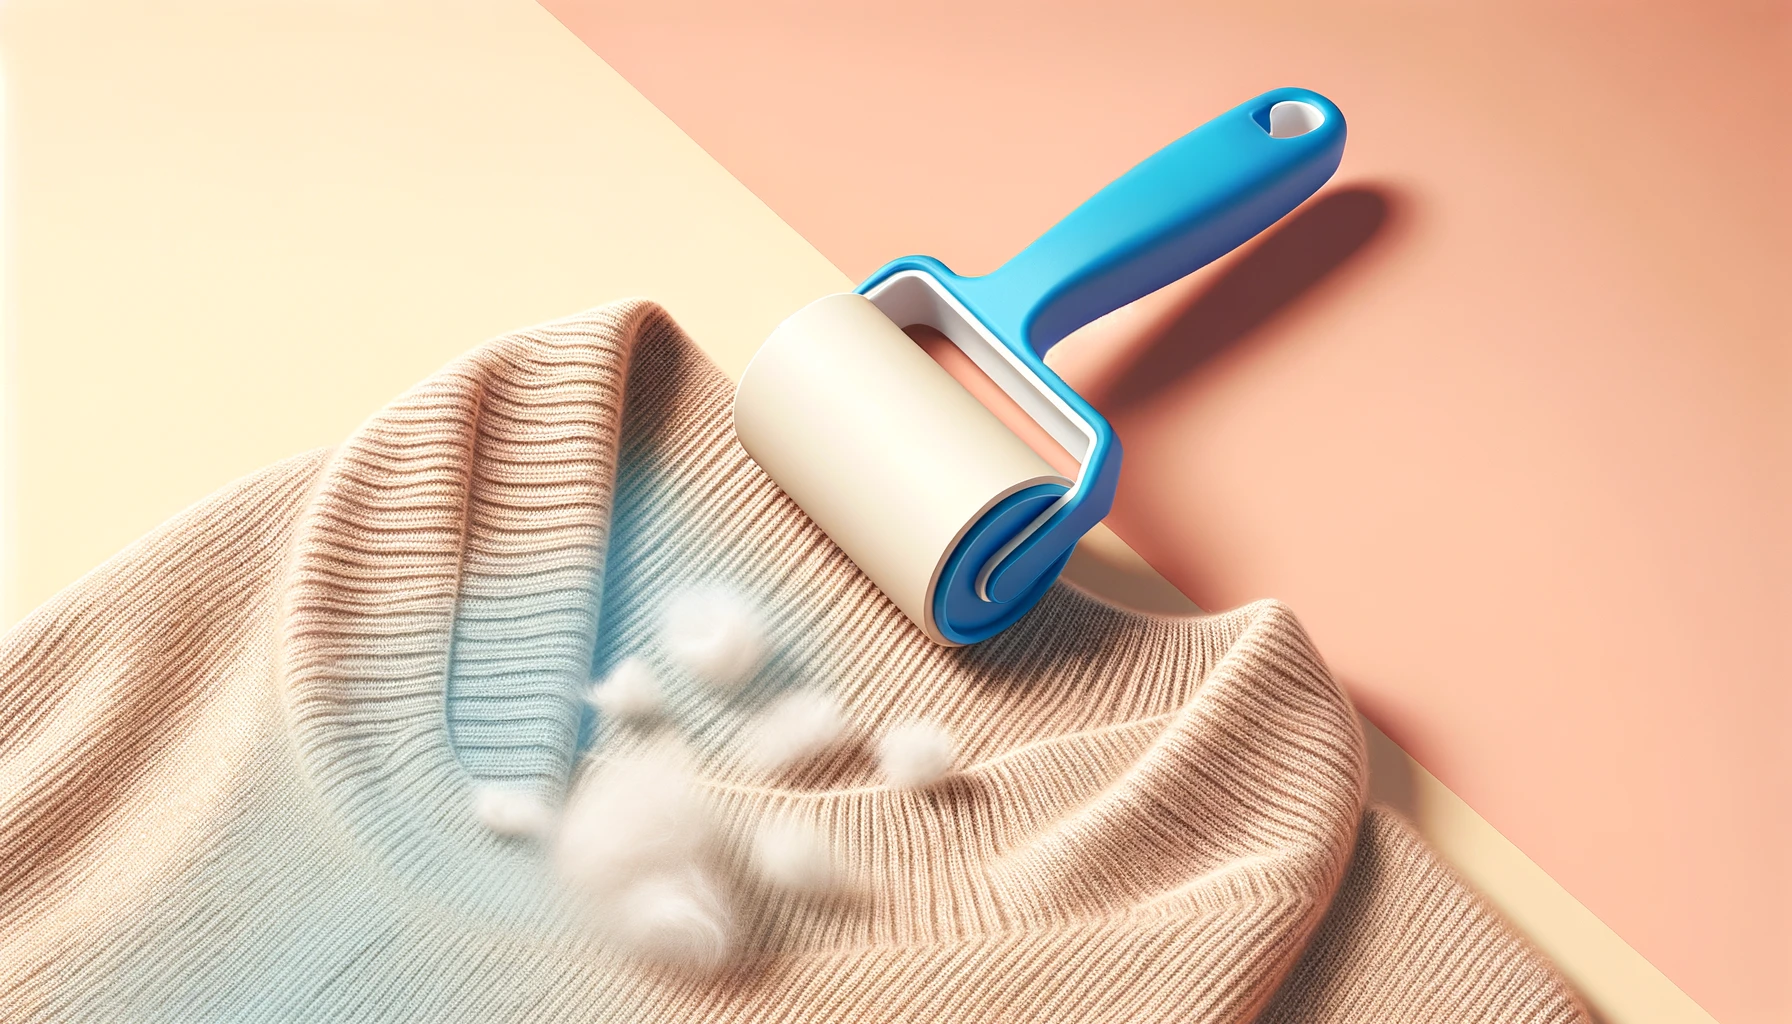 A lint roller with a blue handle rolls over a beige sweater, removing fluff against a pastel gradient background.